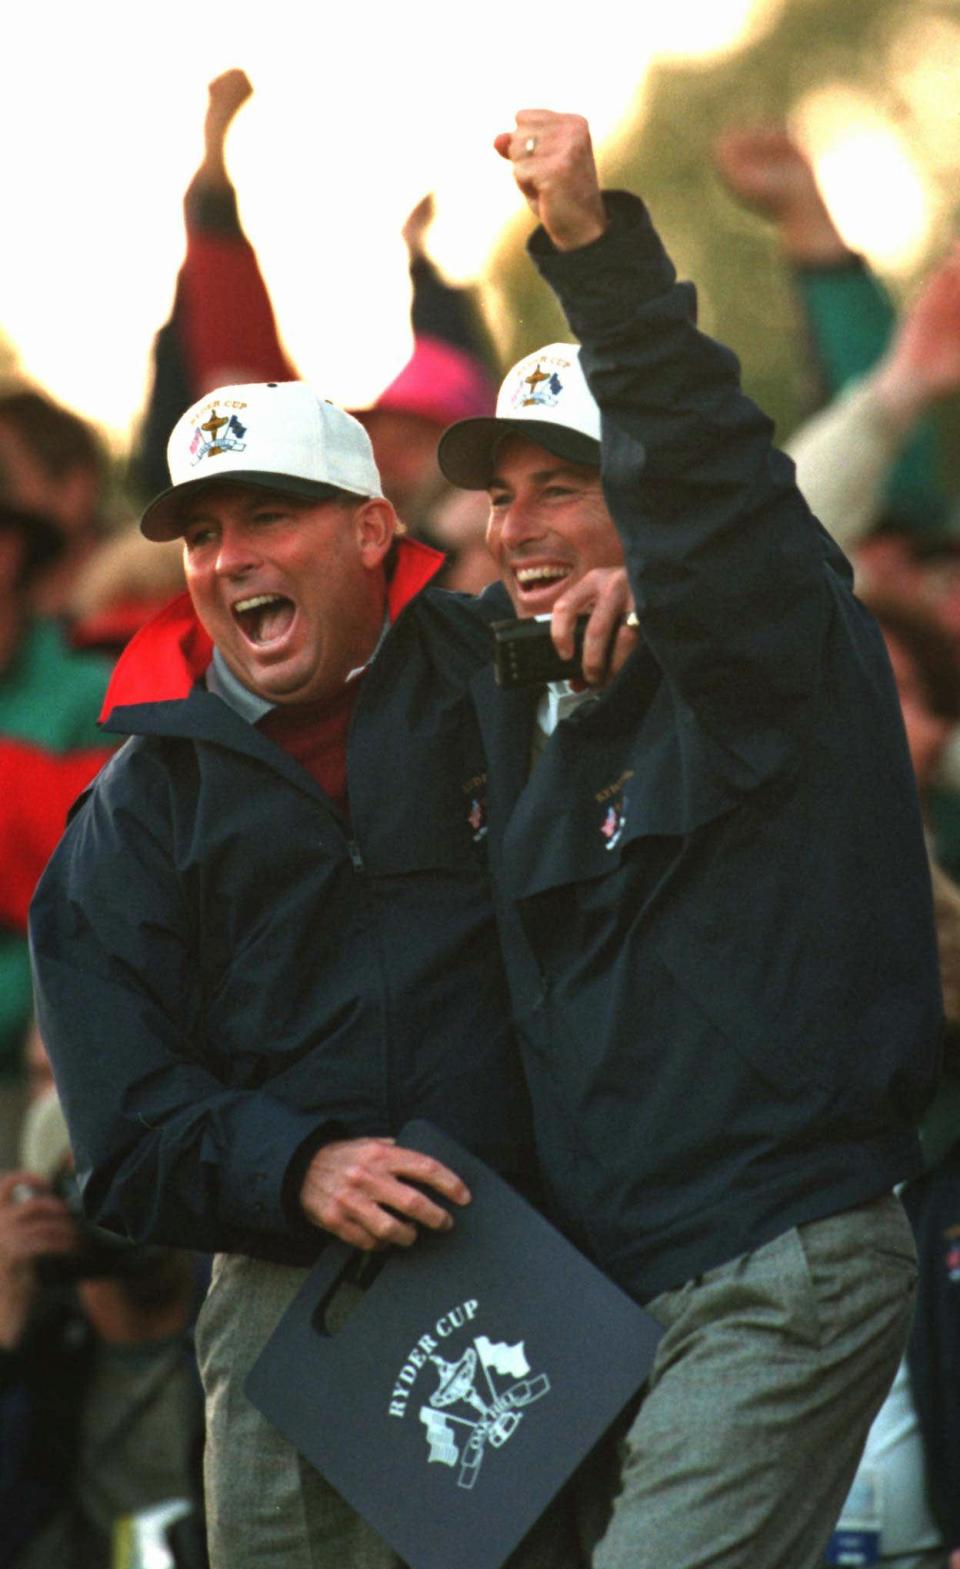 American team captain Lanny Wadkins (left) and Curtis Strange celebrate after Corey Pavin chips in to win the 18th hole and the match Saturday afternoon. (Photo: Jamie Germano/Rochester Democrat & Chronicle/USA Today Network)